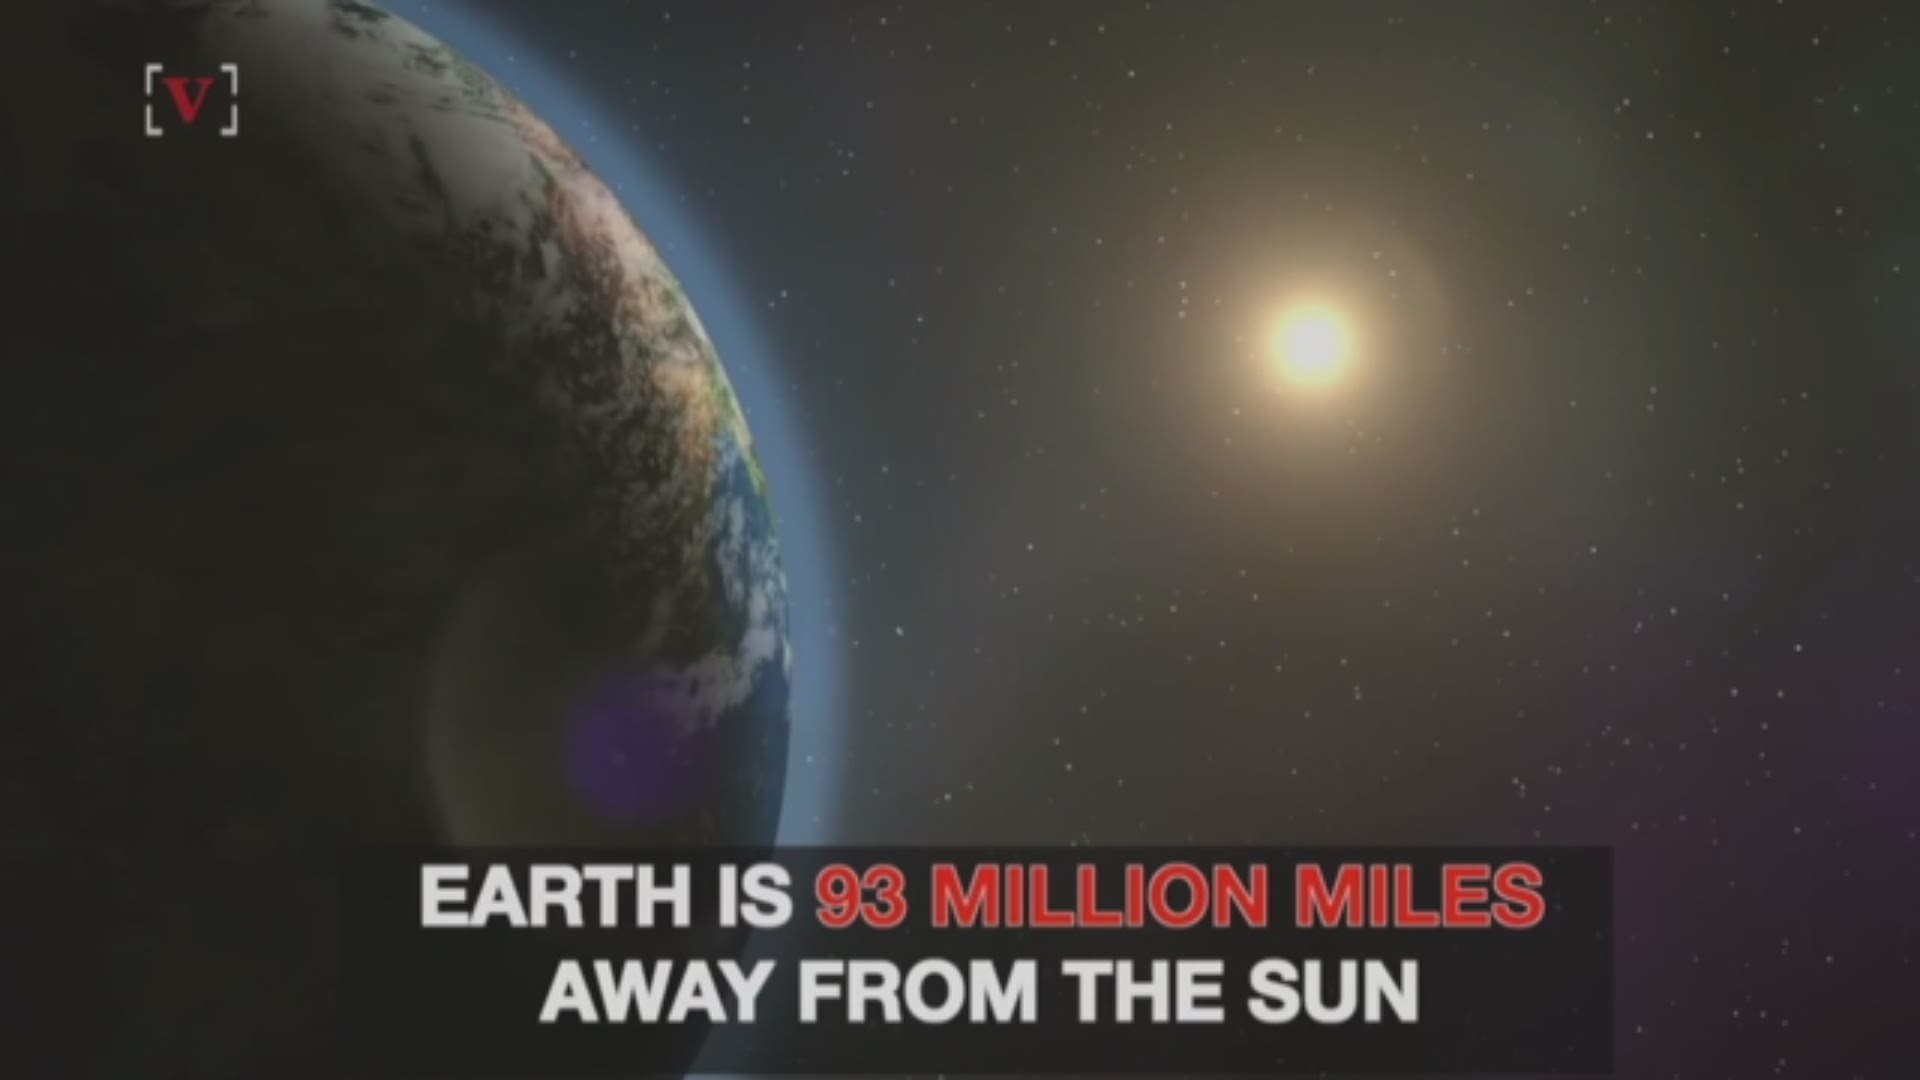 NASA is planning on launching a probe that will get within 4 million miles of the Sun.